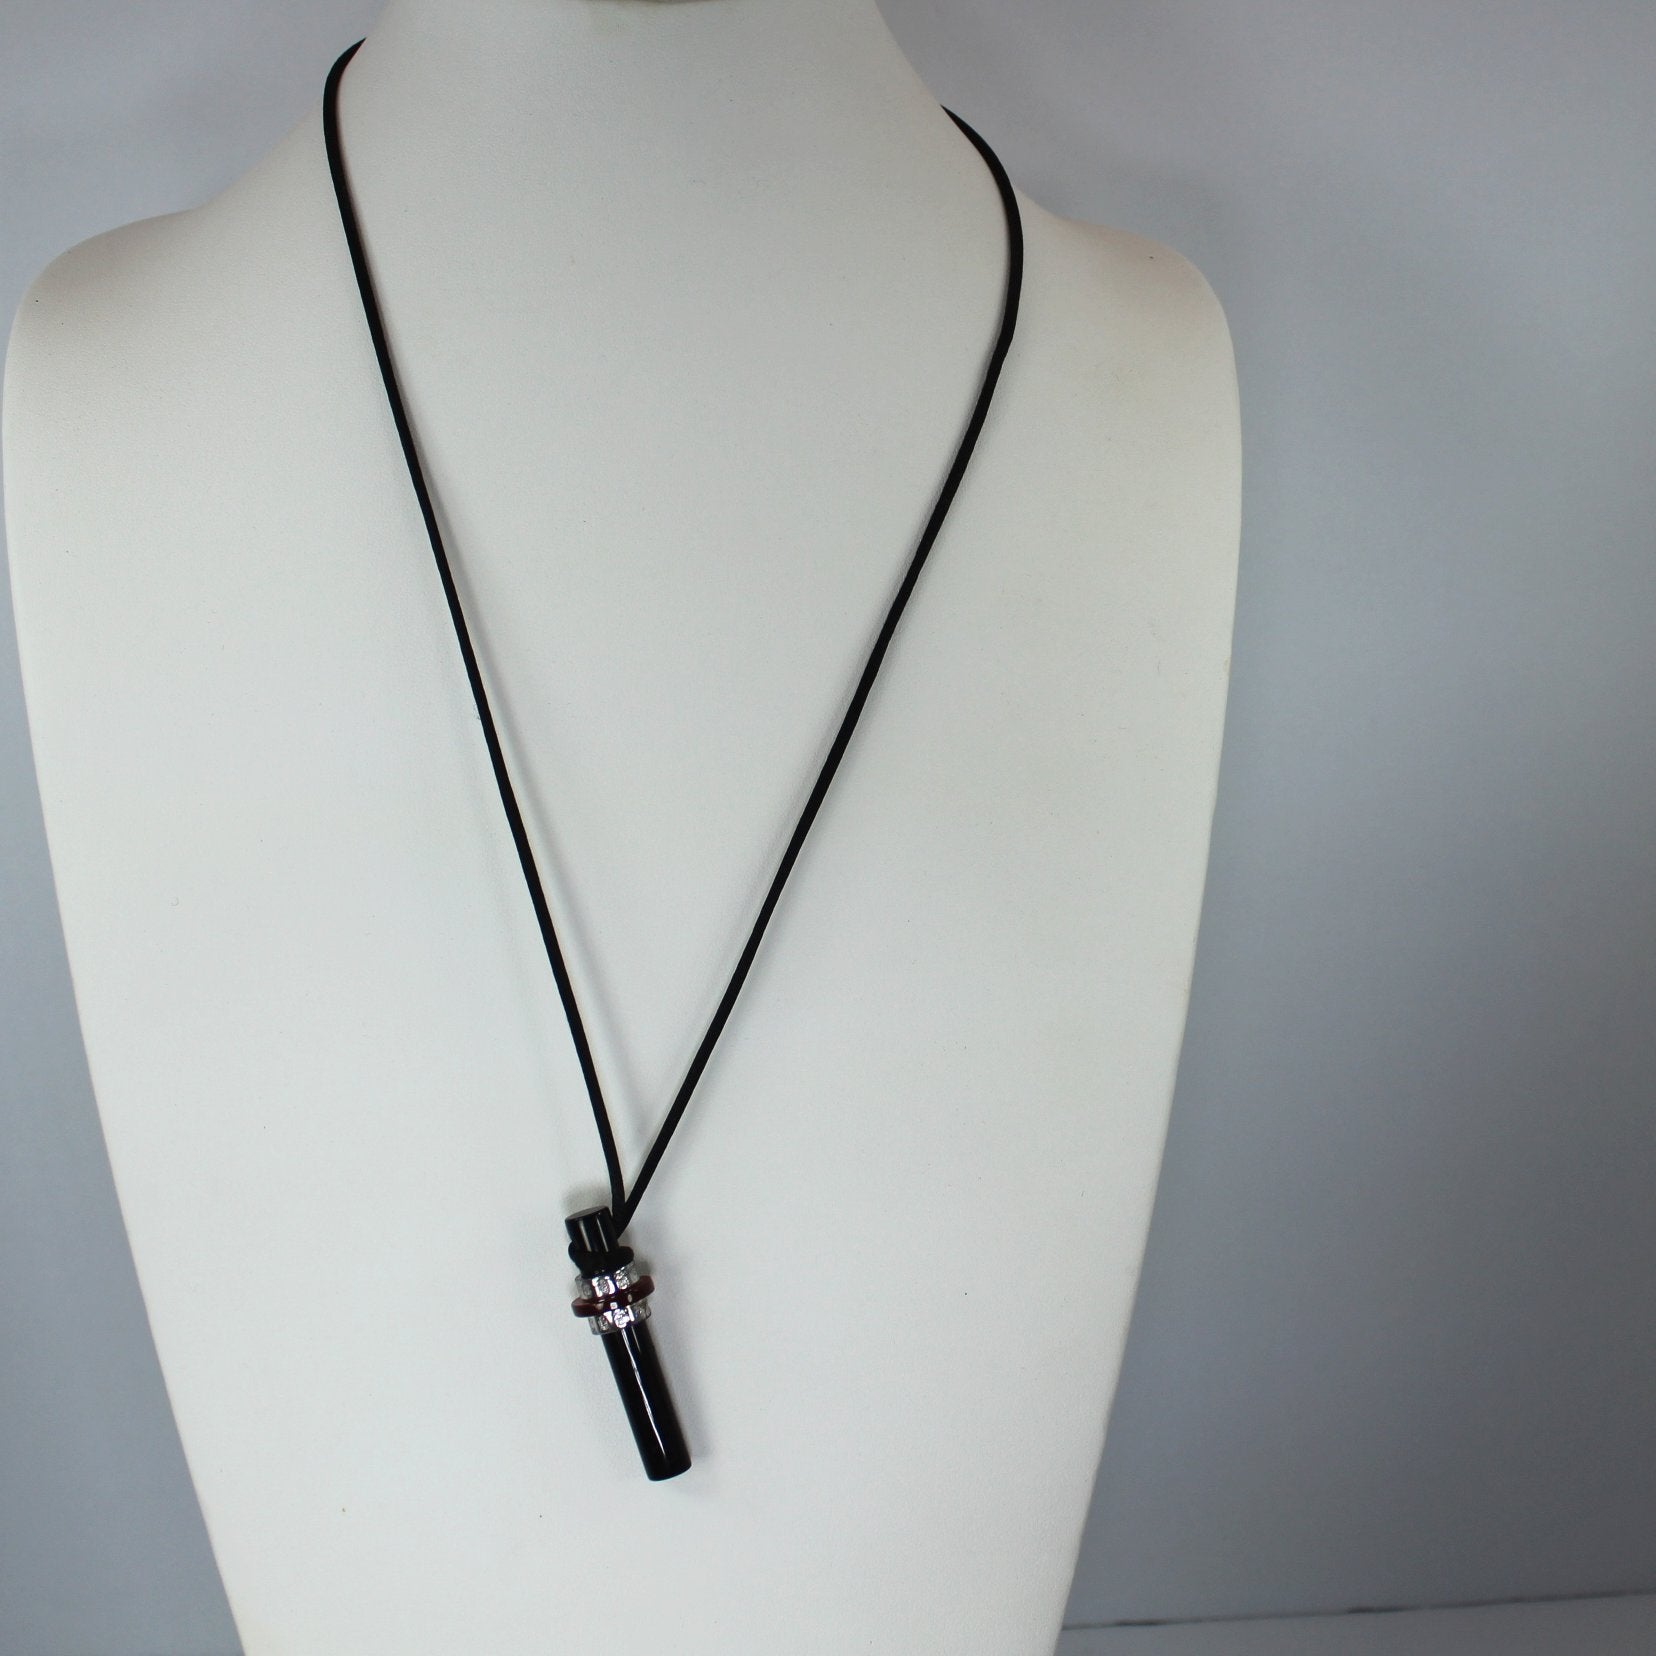 Black Red Glass Necklace Silver Bands Asian Symbols Modernistic full view pendant necklace mod design